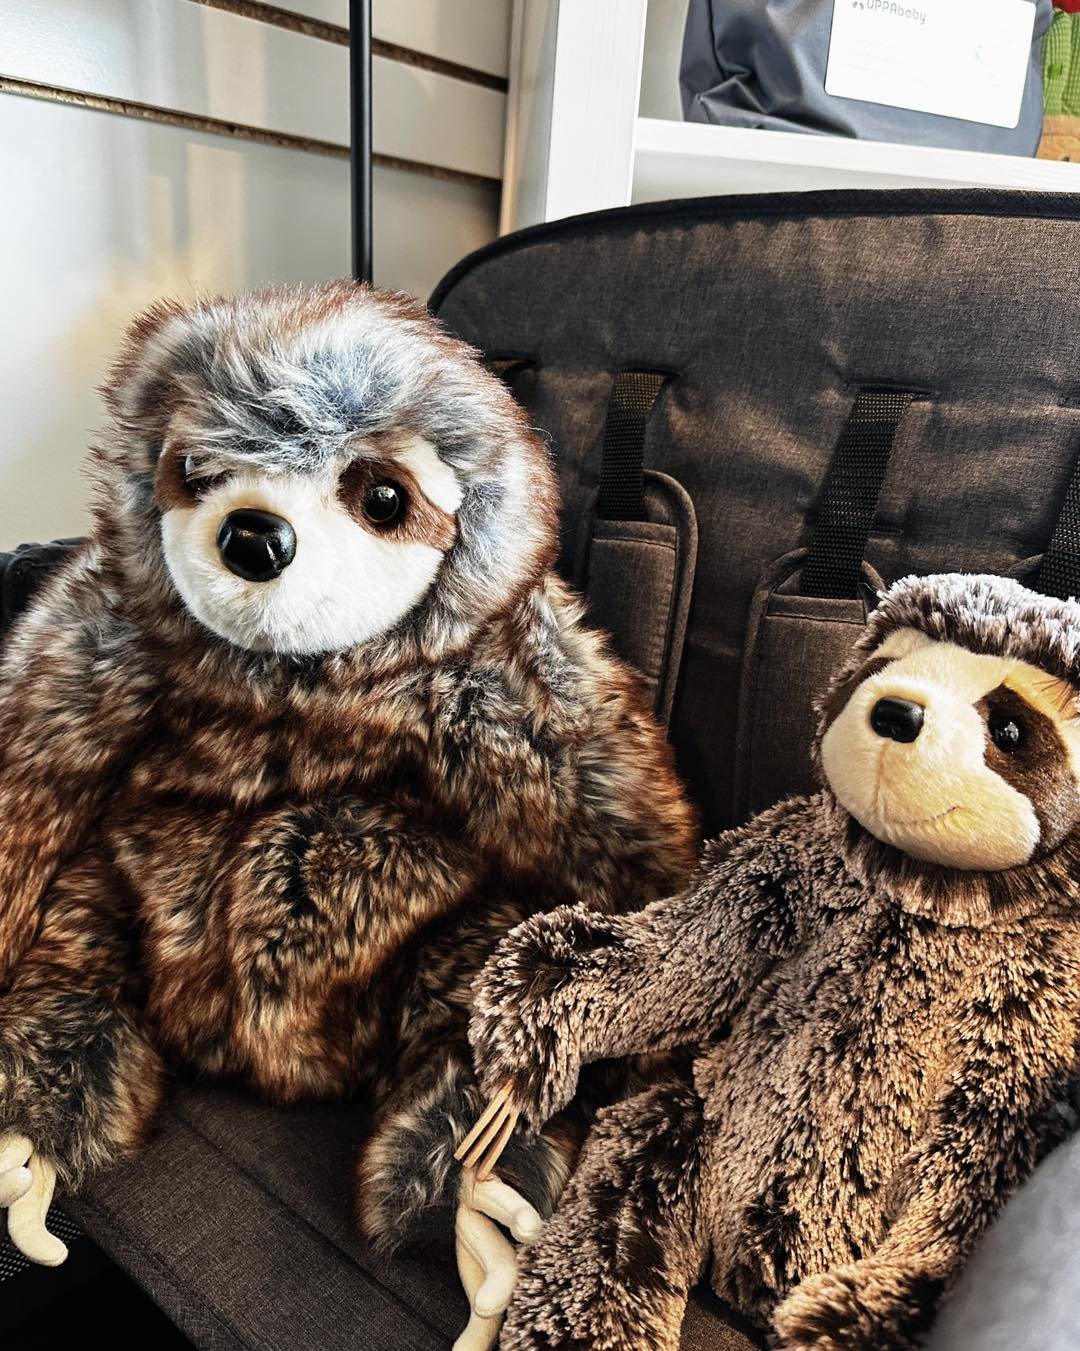 These two buddies know that the best way to relax is inside a WonderFold wagon. Come see one in person and you&rsquo;ll quickly learn why both parents and kids love them so much! 

#shopsmall #shoplocal #ababynaturally #babyboutique #supportsmallbusi